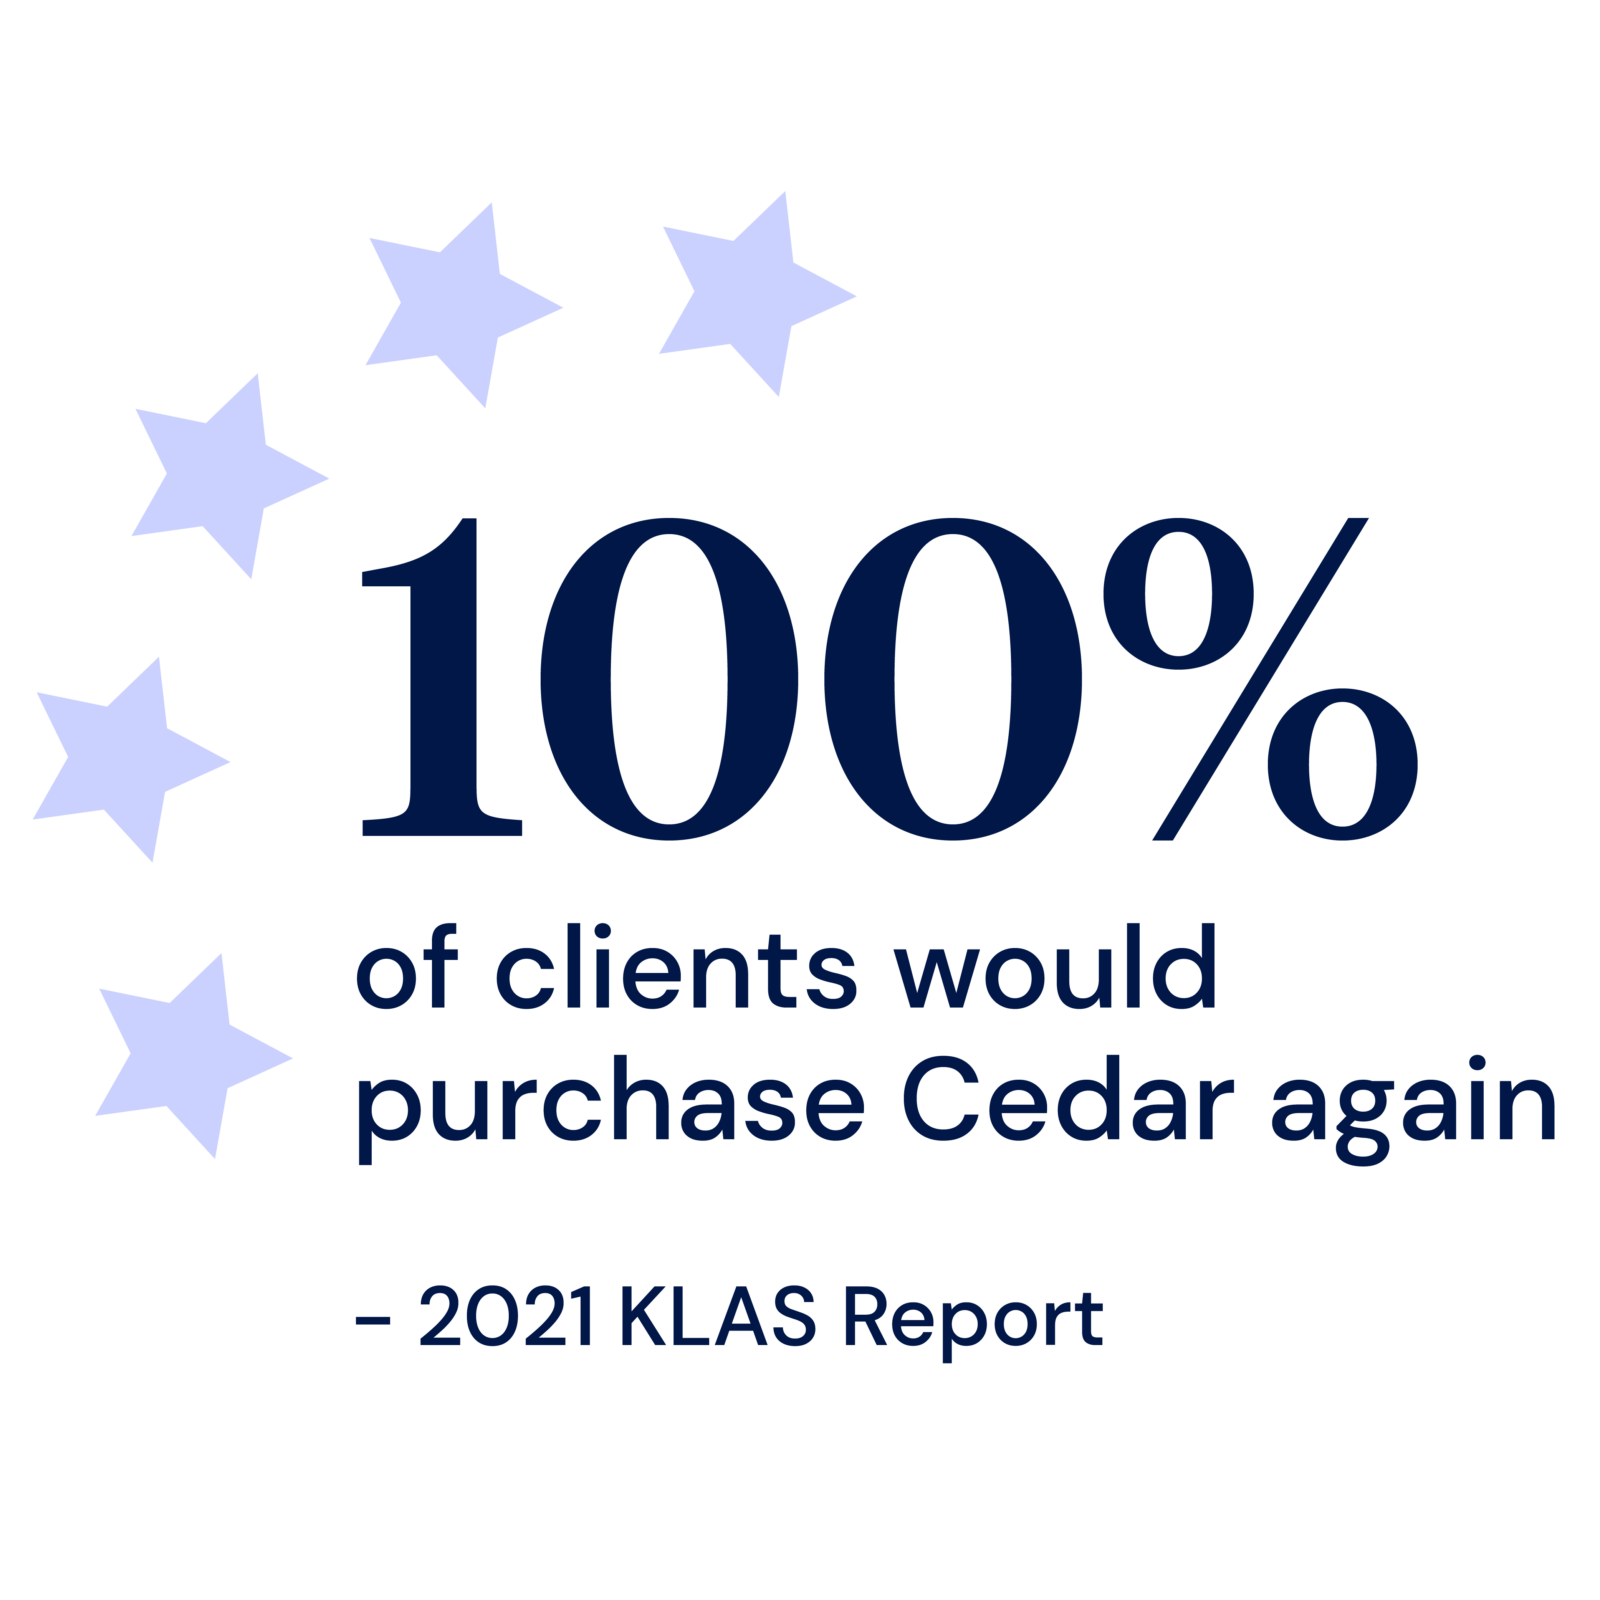 Statistic: 2021 KLAS Report 100% of clients would purchase Cedar again